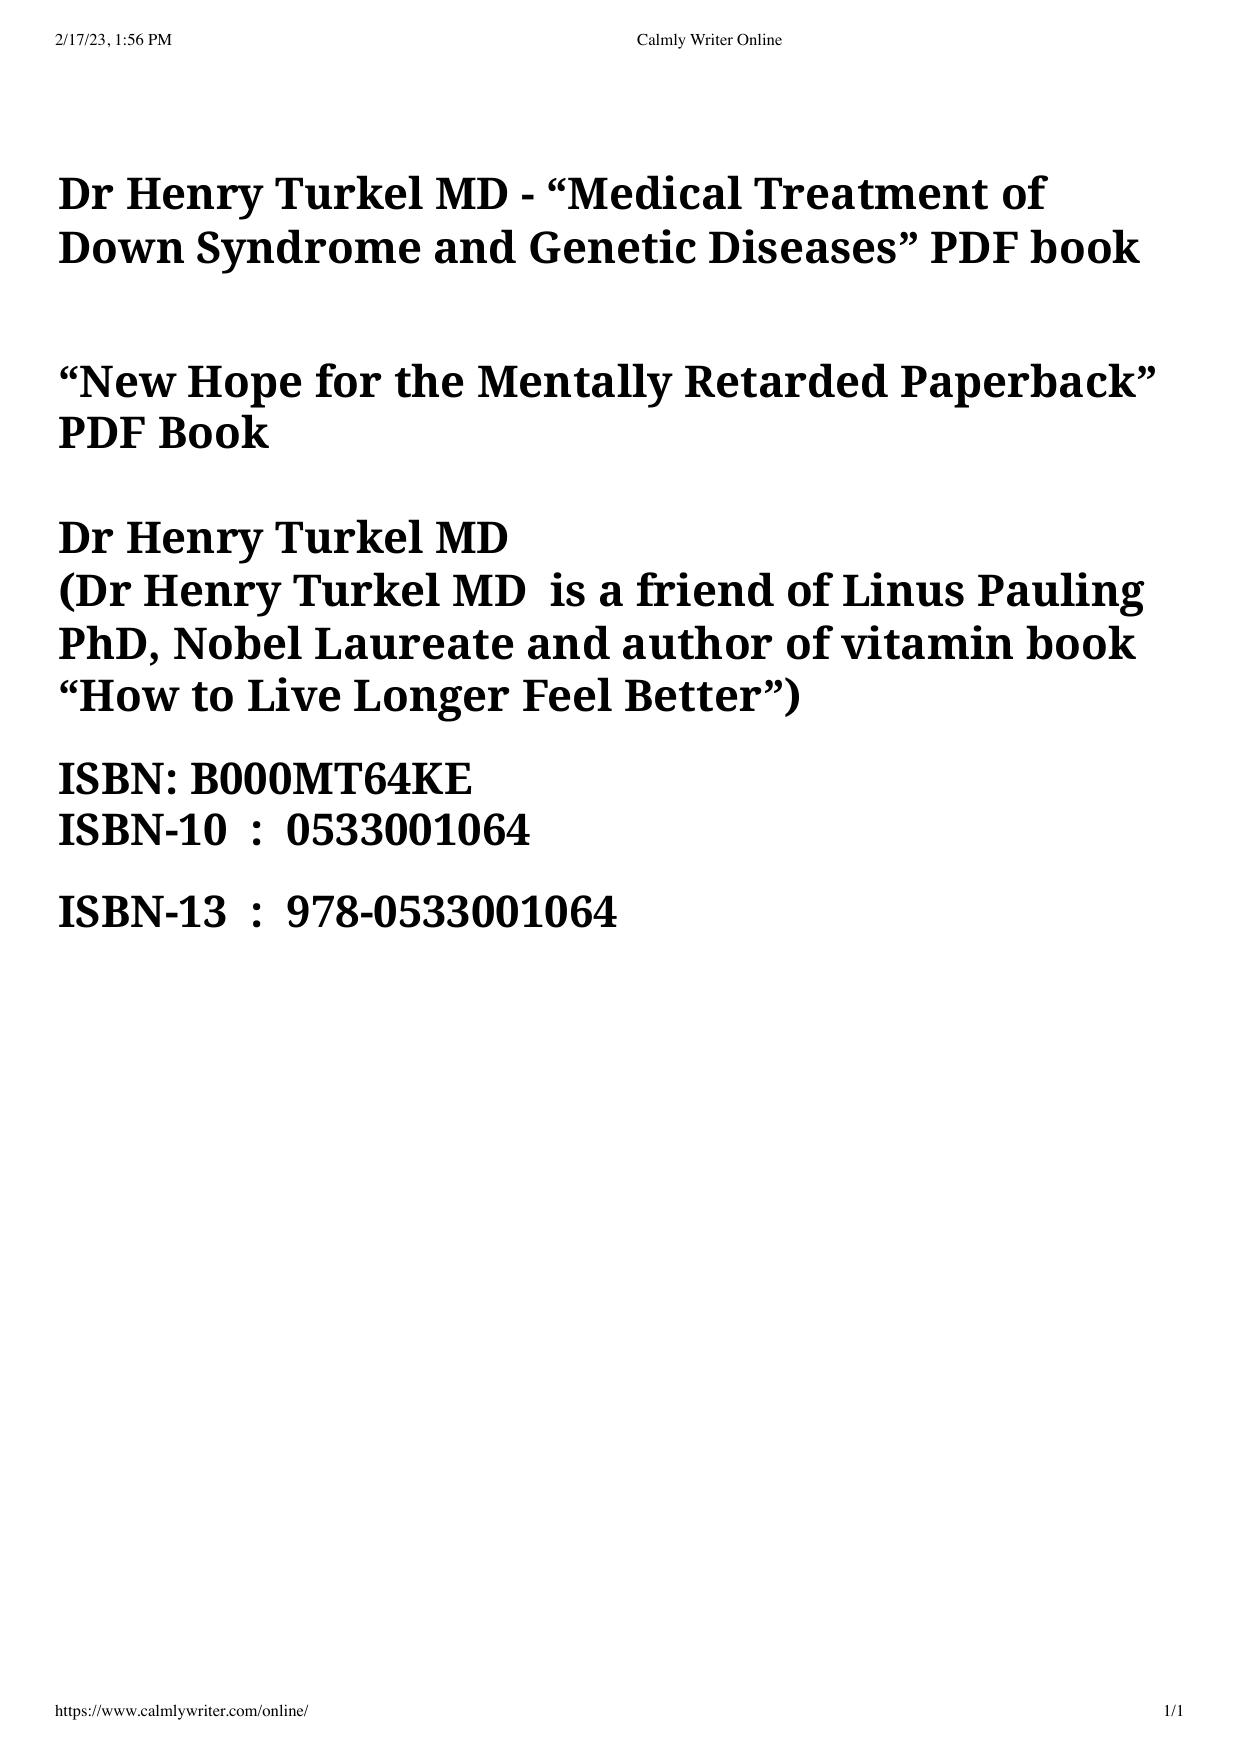 Medical Treatment of Down Syndrome and Genetic Diseases - New Hope for the Mentally Retarded by Dr Henry Turkel by Henry Turkel MD Linus Pauling Abram Hoffer Andrew Saul